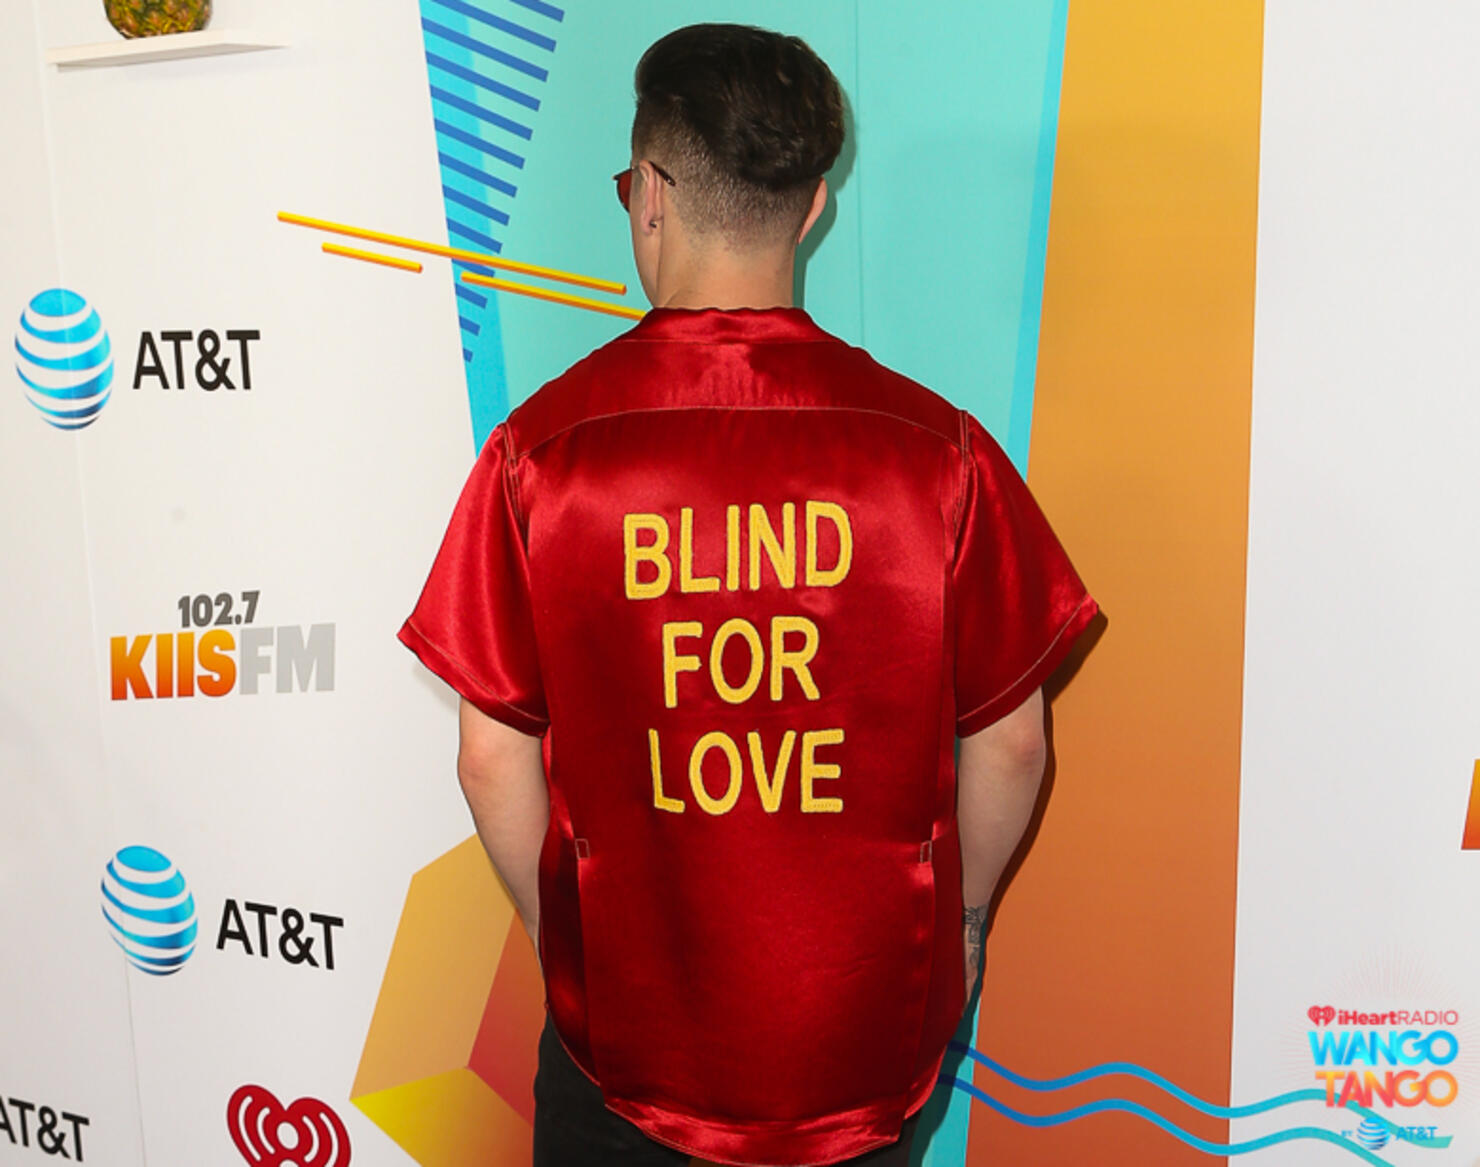 Logan Henderson arrives at the 2018 iHeartRadio Wango Tango by AT&T at Banc of California Stadium on June 2, 2018 in Los Angeles, California. 